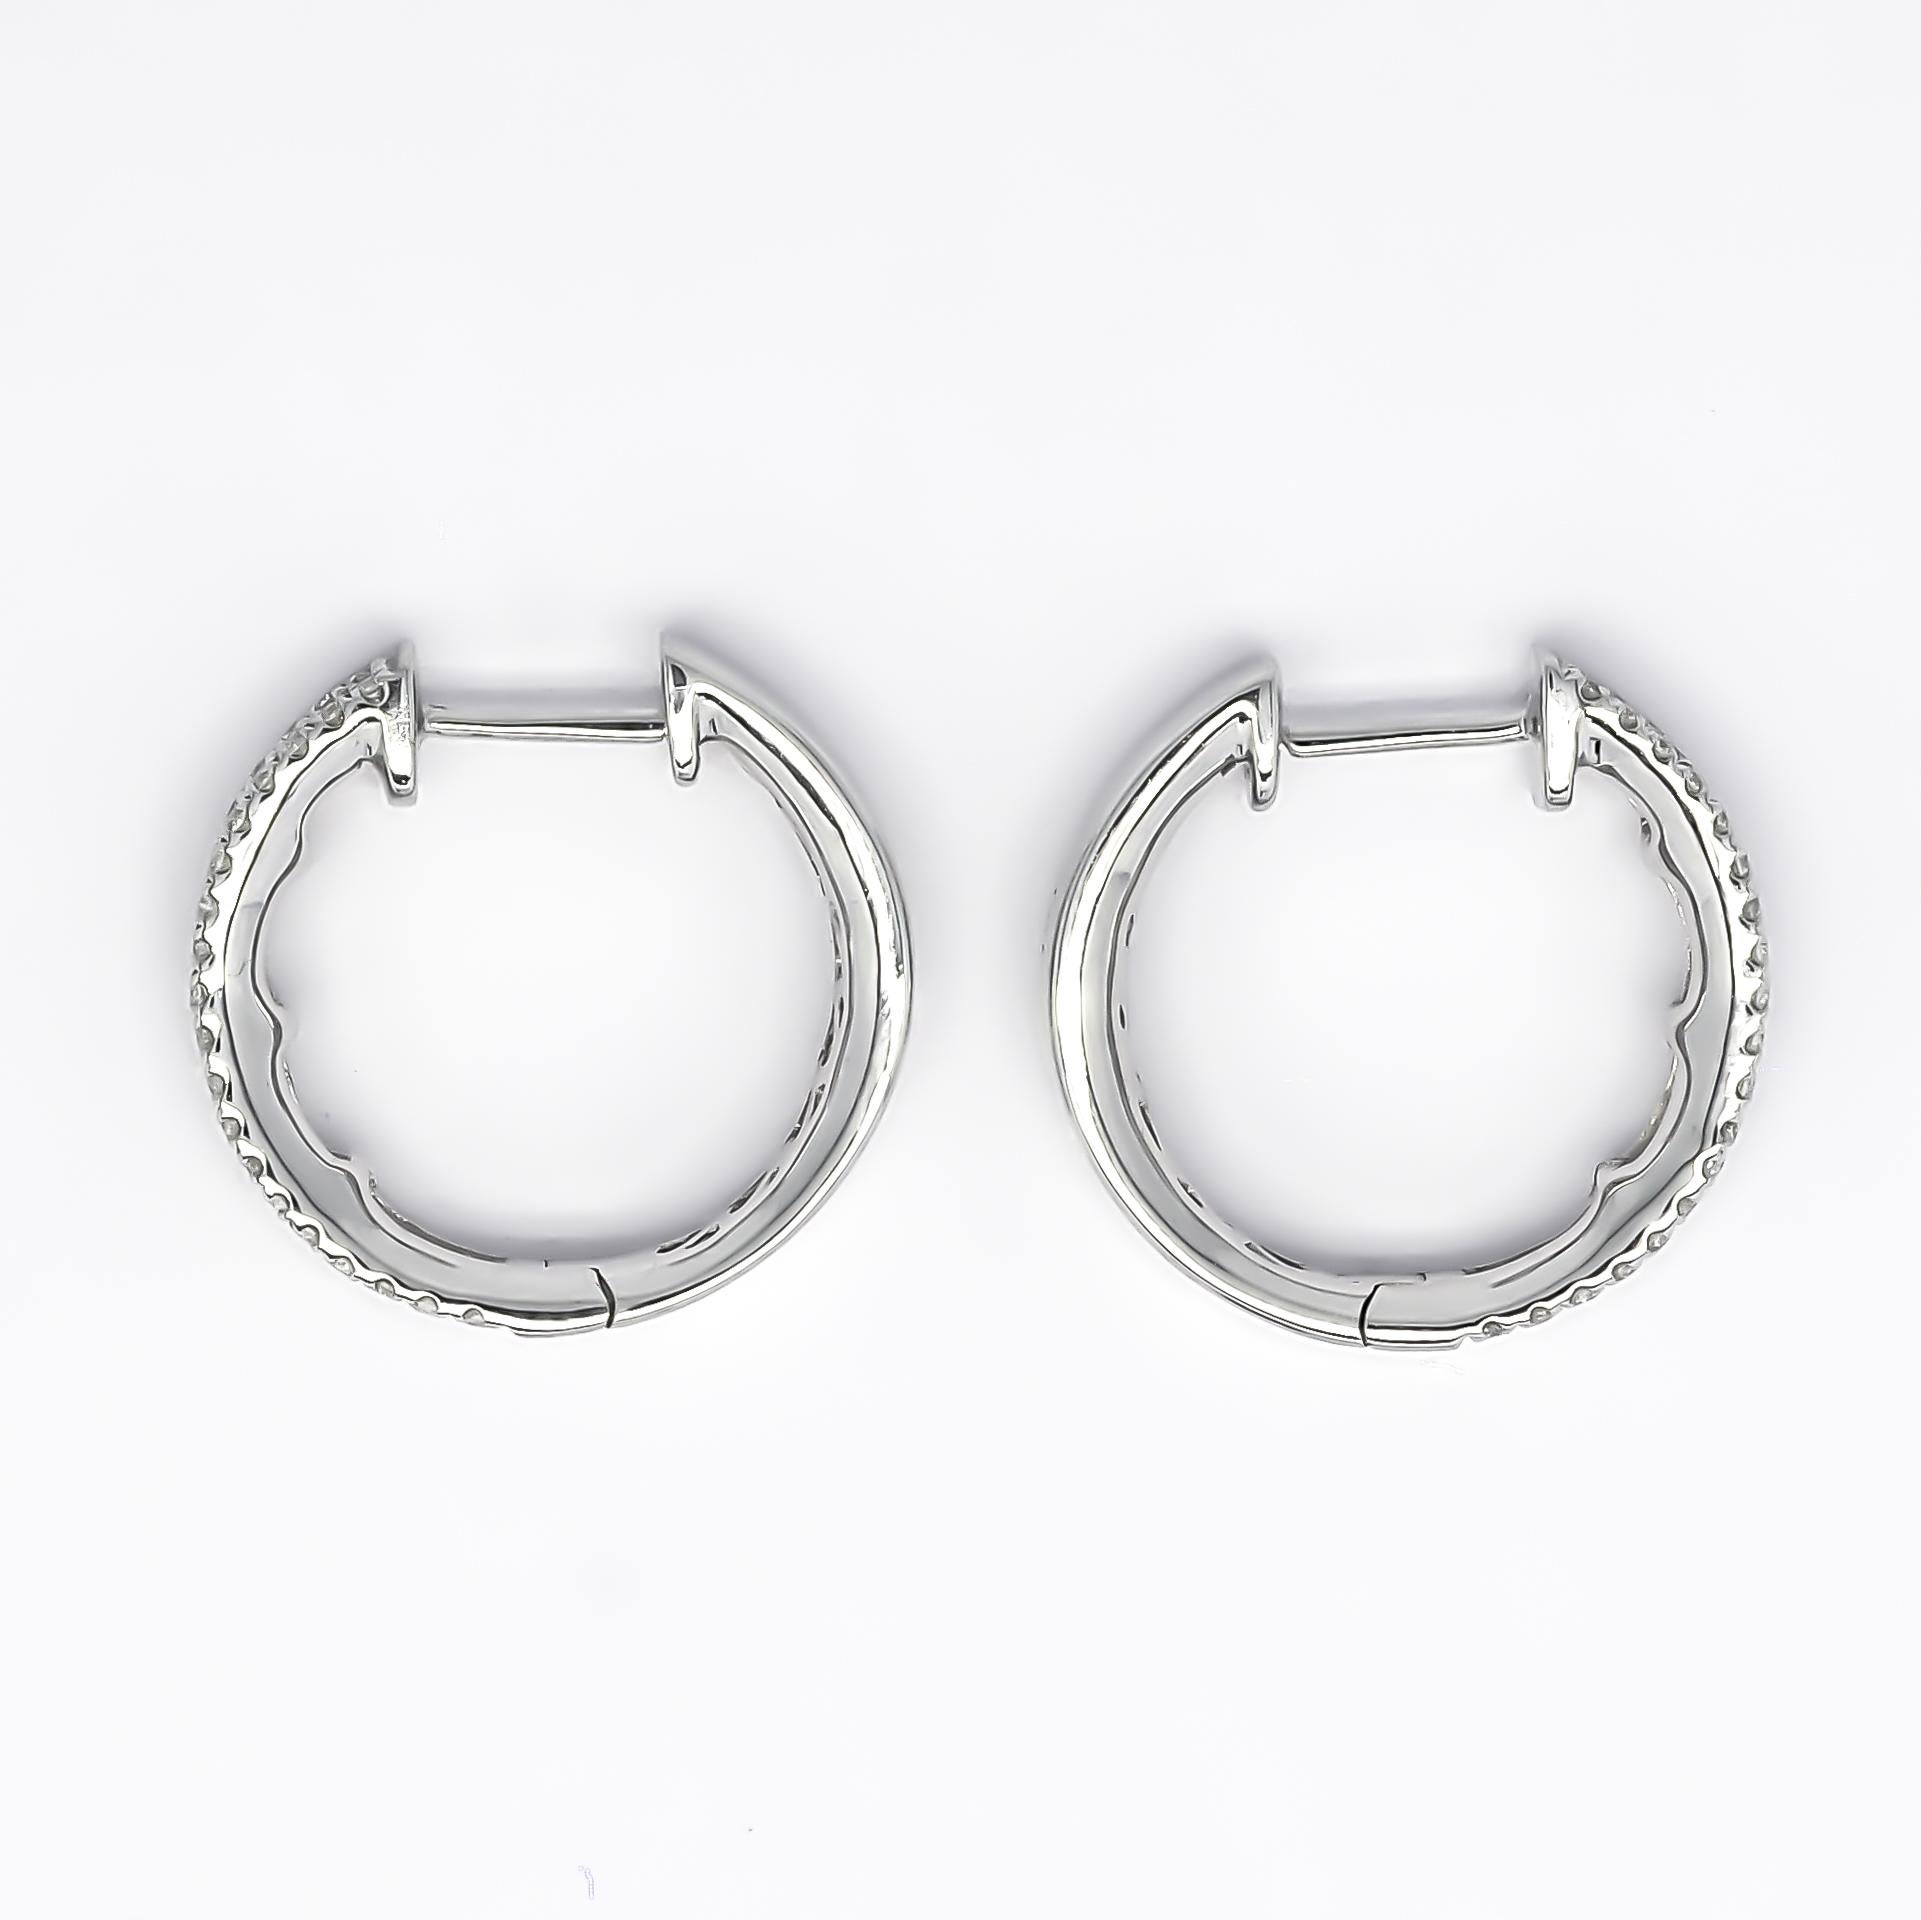 Natural Diamond 0.85 carats 18KT White Gold Hoop Huggie Earrings In New Condition For Sale In Antwerpen, BE